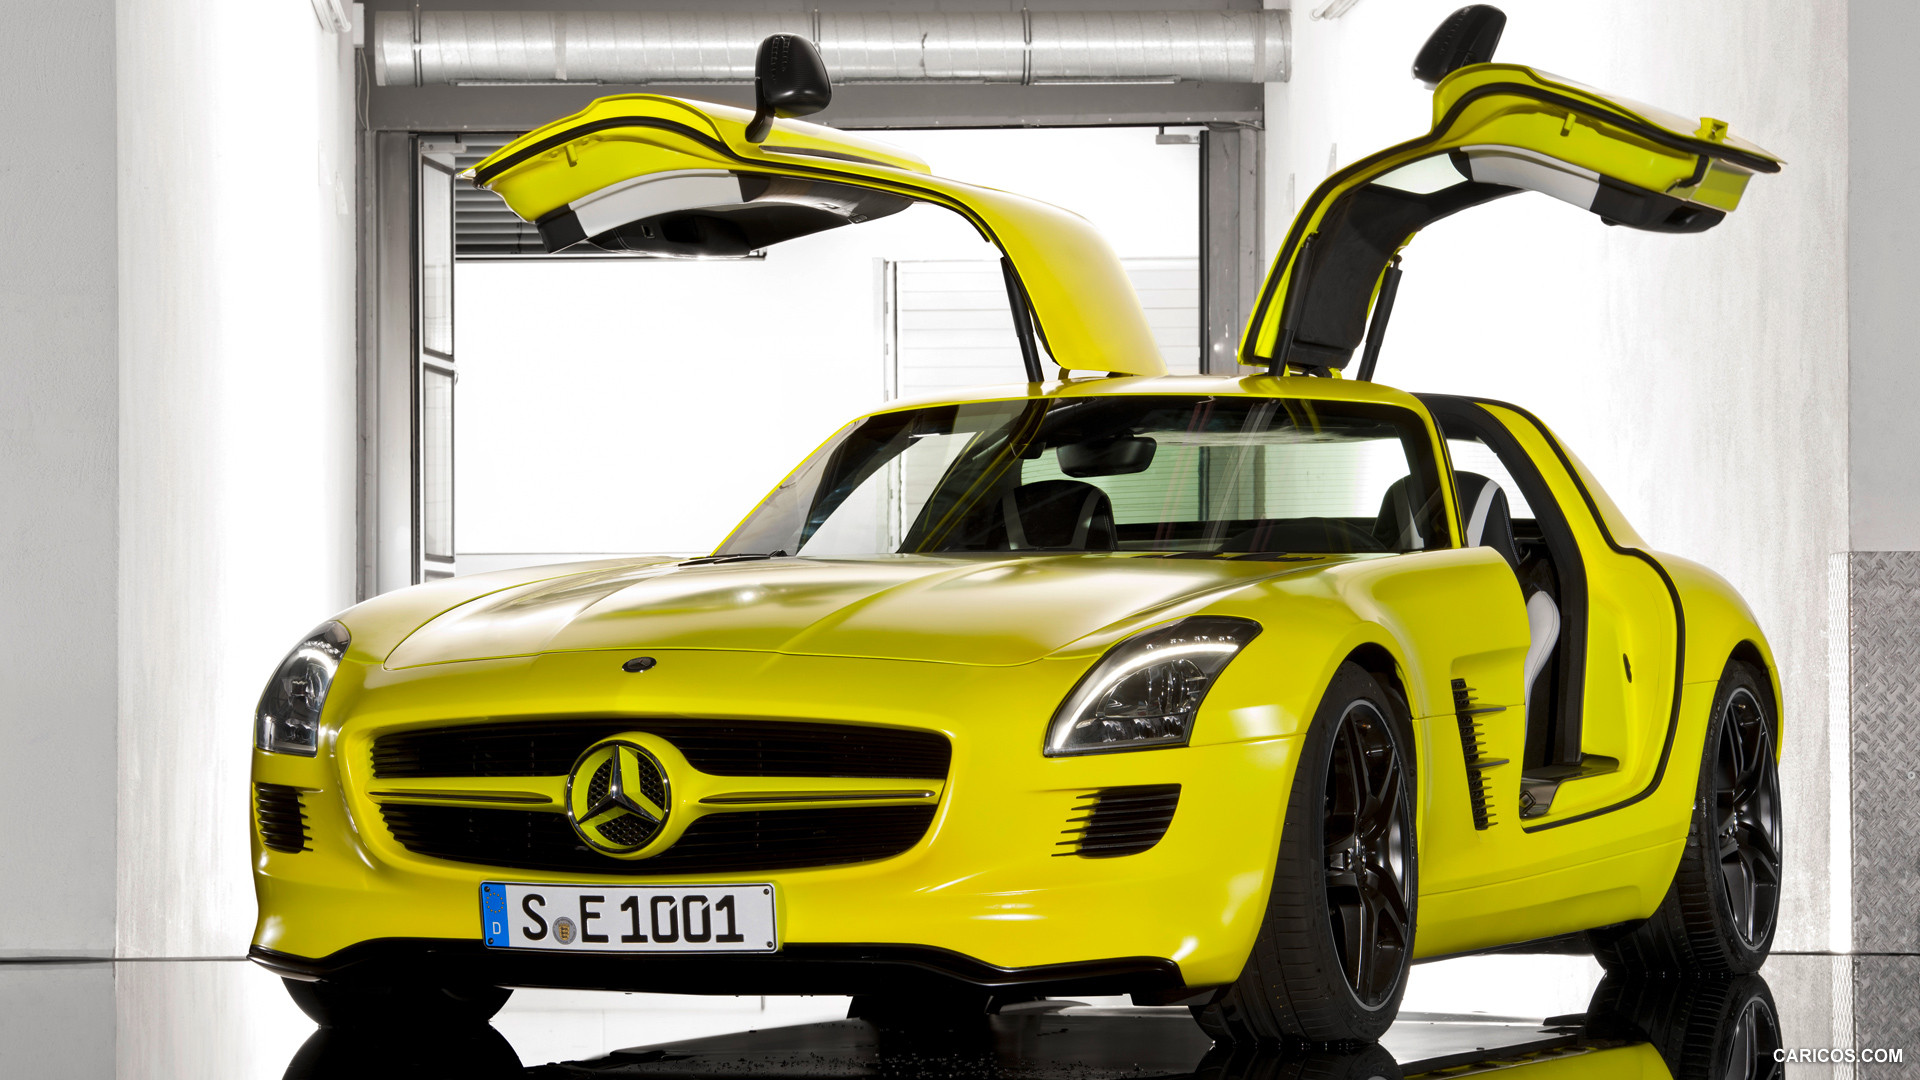 Mercedes-Benz SLS AMG E-CELL Concept  - Front, #42 of 60